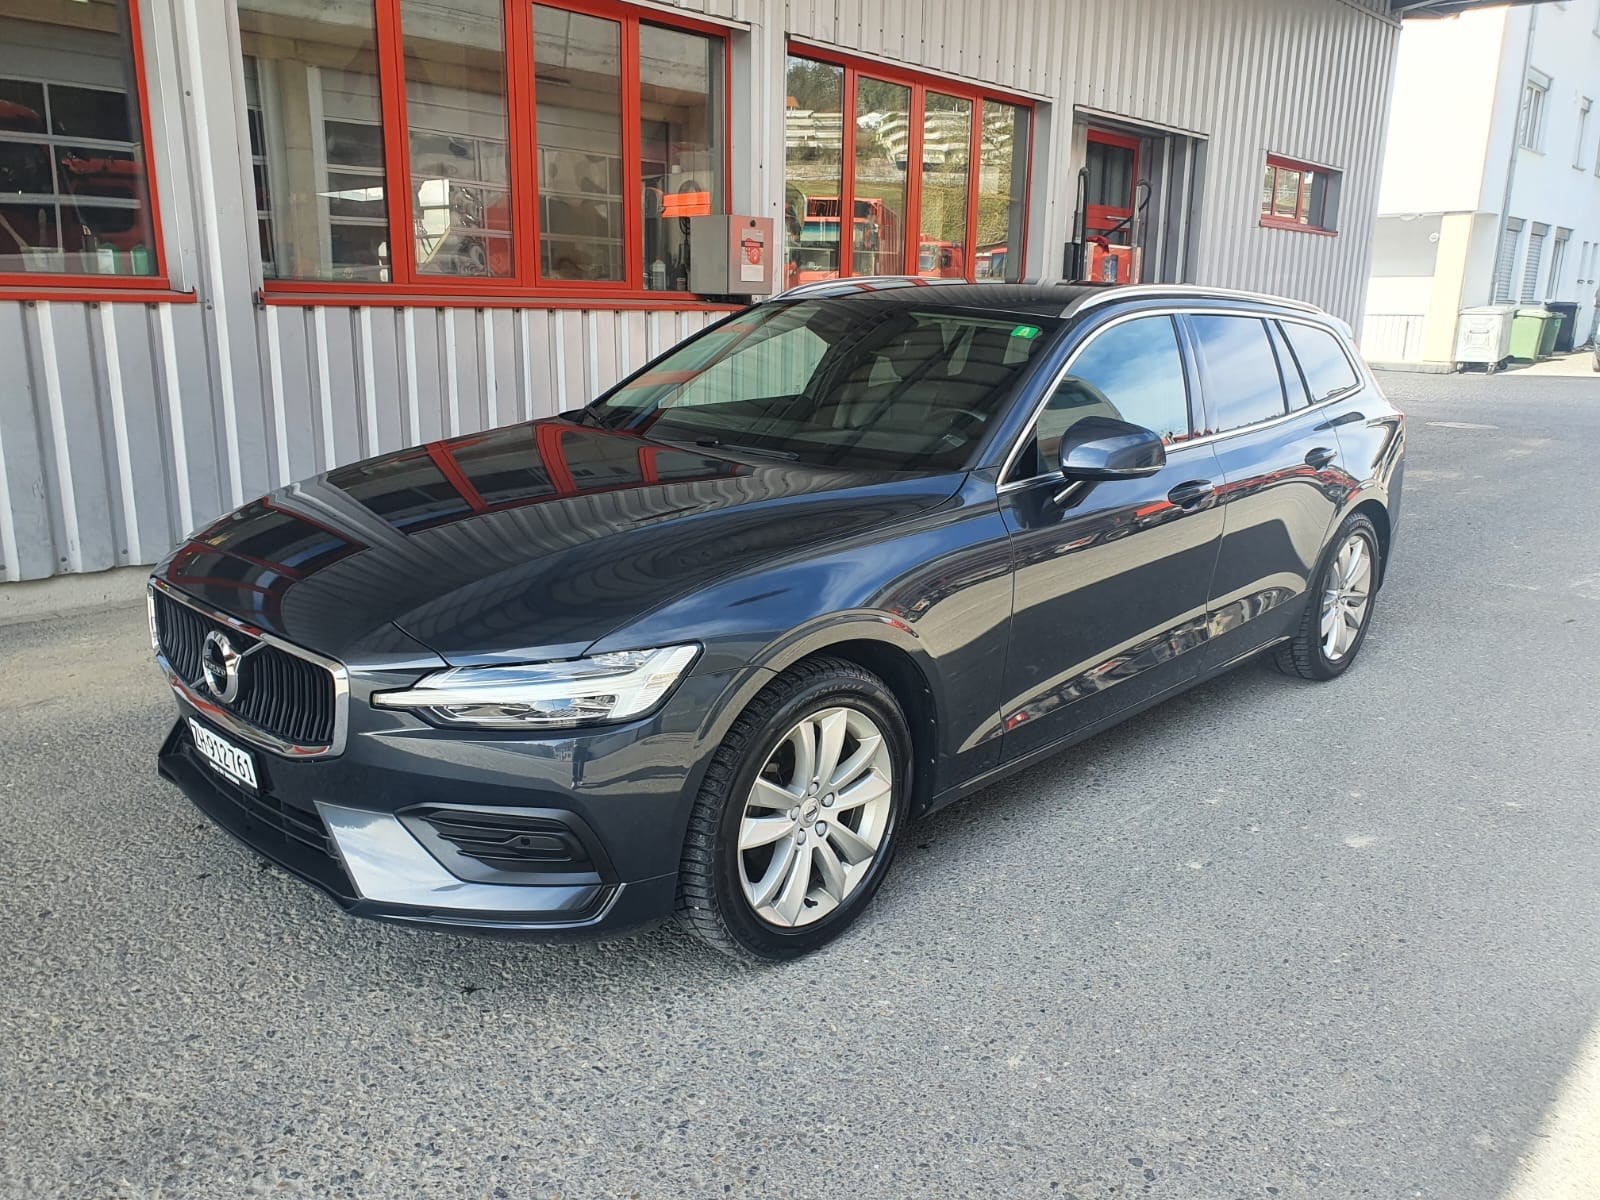 VOLVO V60 D4 AWD Momentum Geartronic